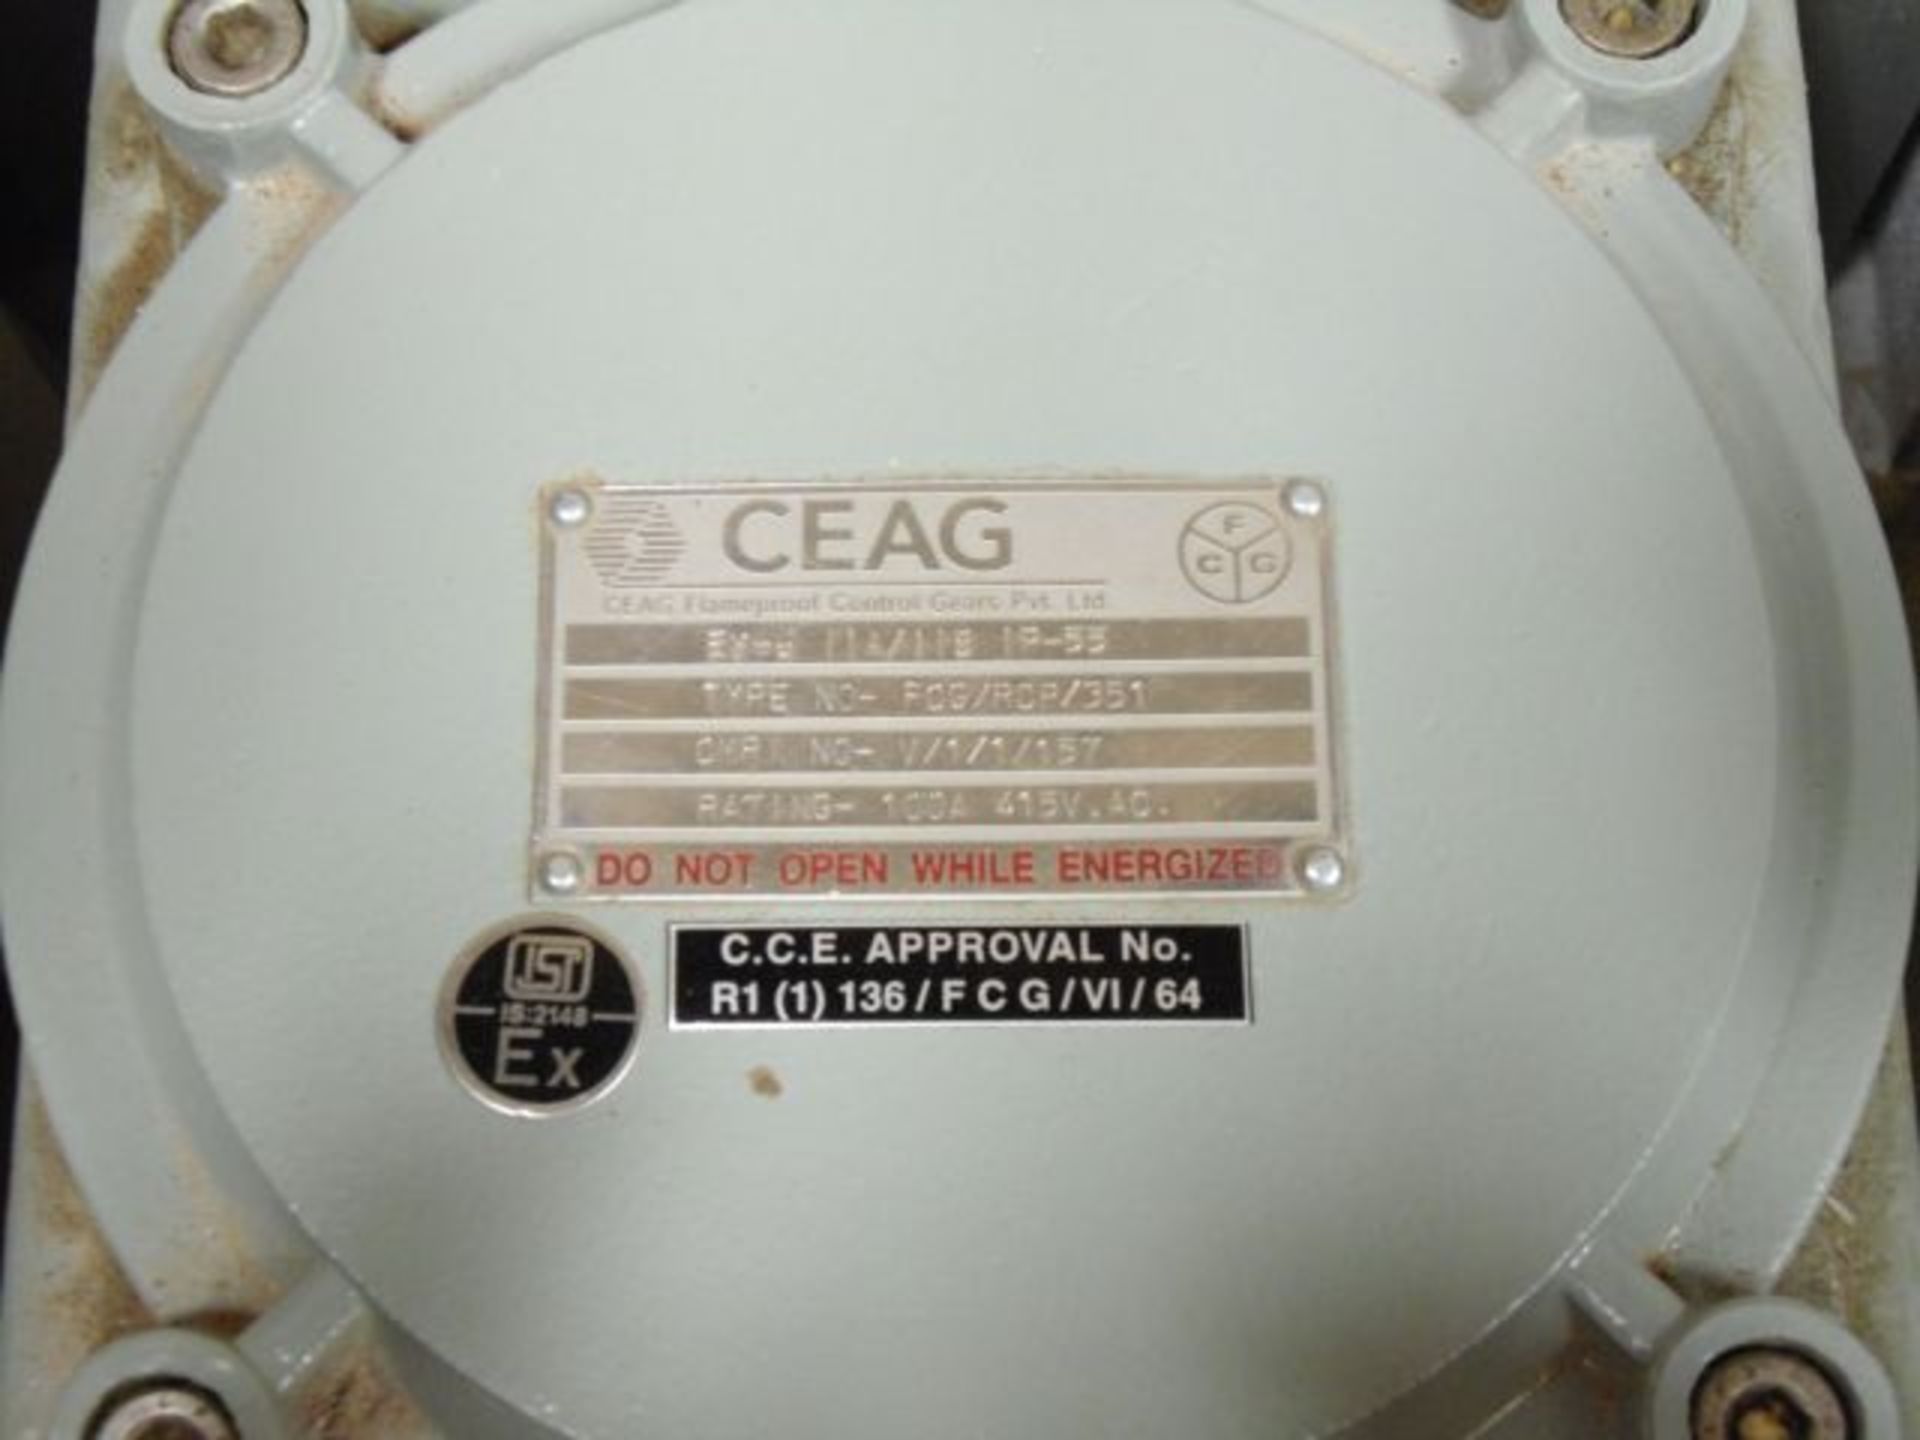 Unused Ceag Flameproof Control for 15 tonne Travelling Crane; EX-D 11a/11b 1P-55; Type no FCG/RCP/ - Image 2 of 2